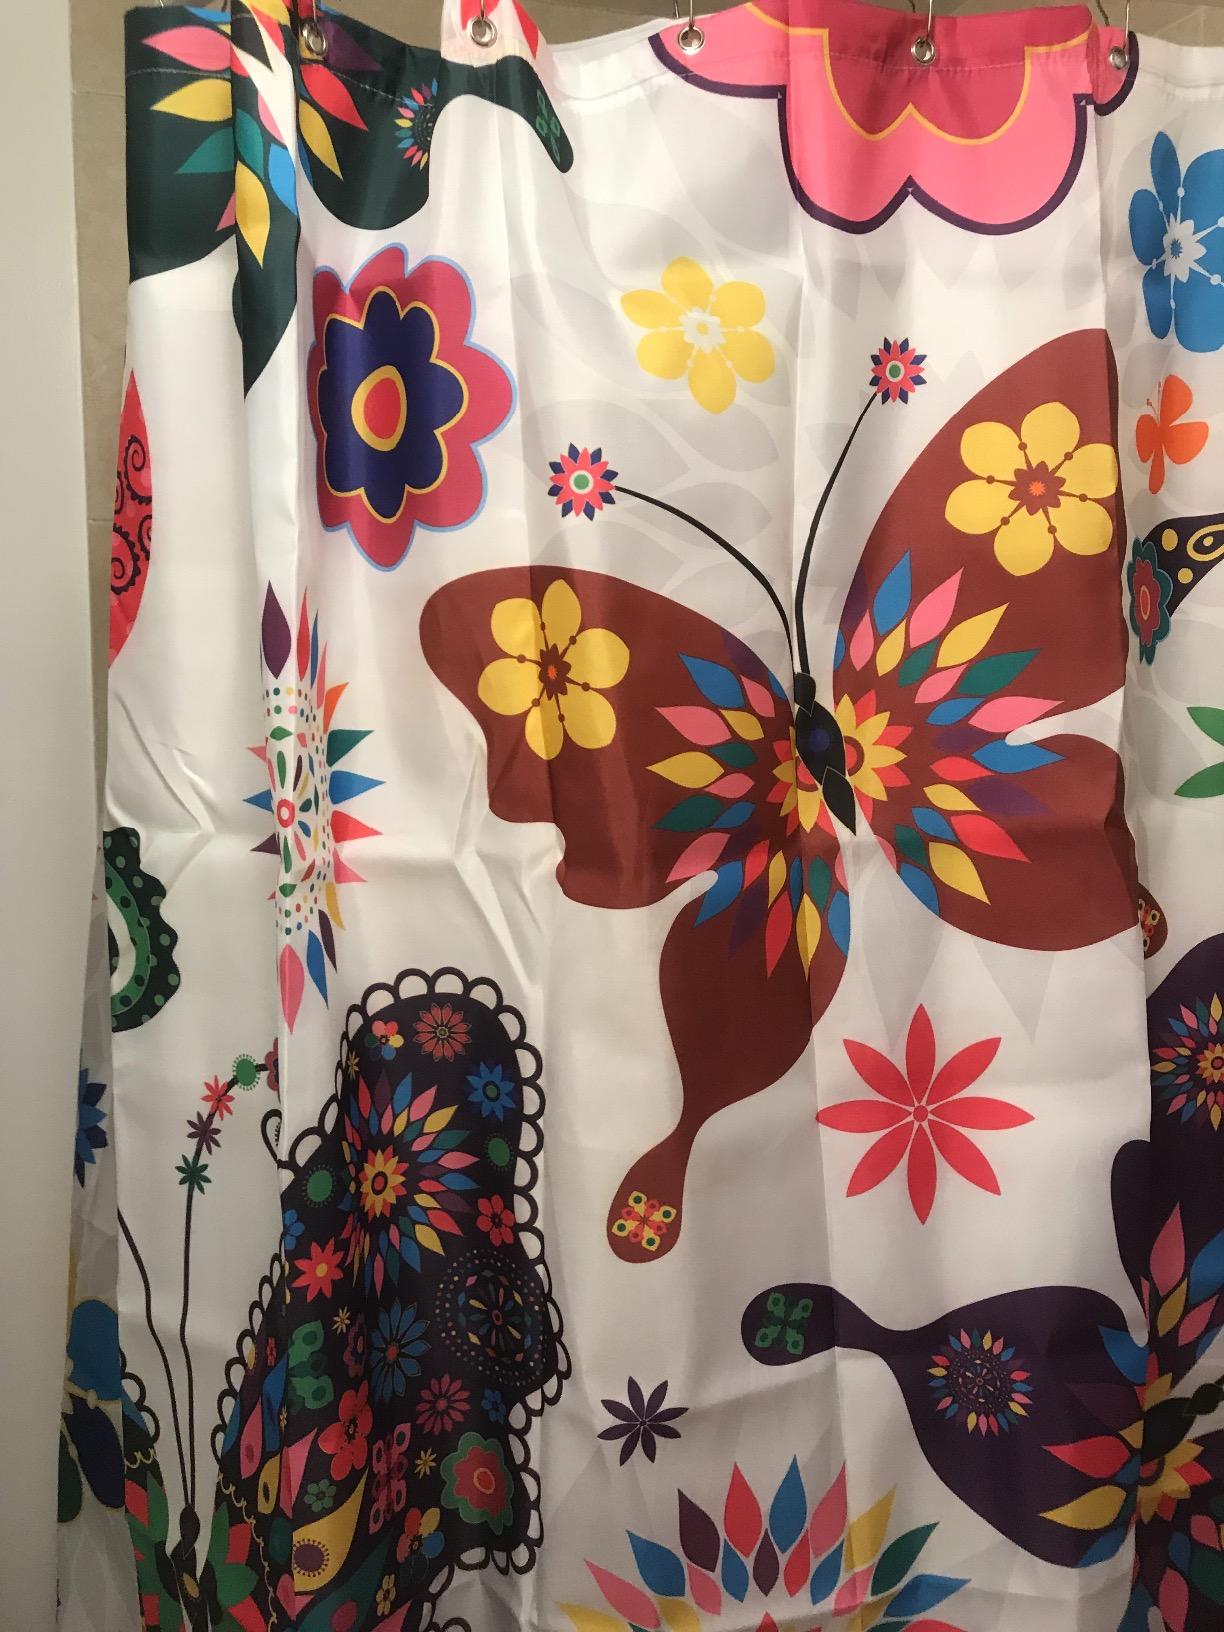 Colorful Monarch Butterfly Shower Curtain